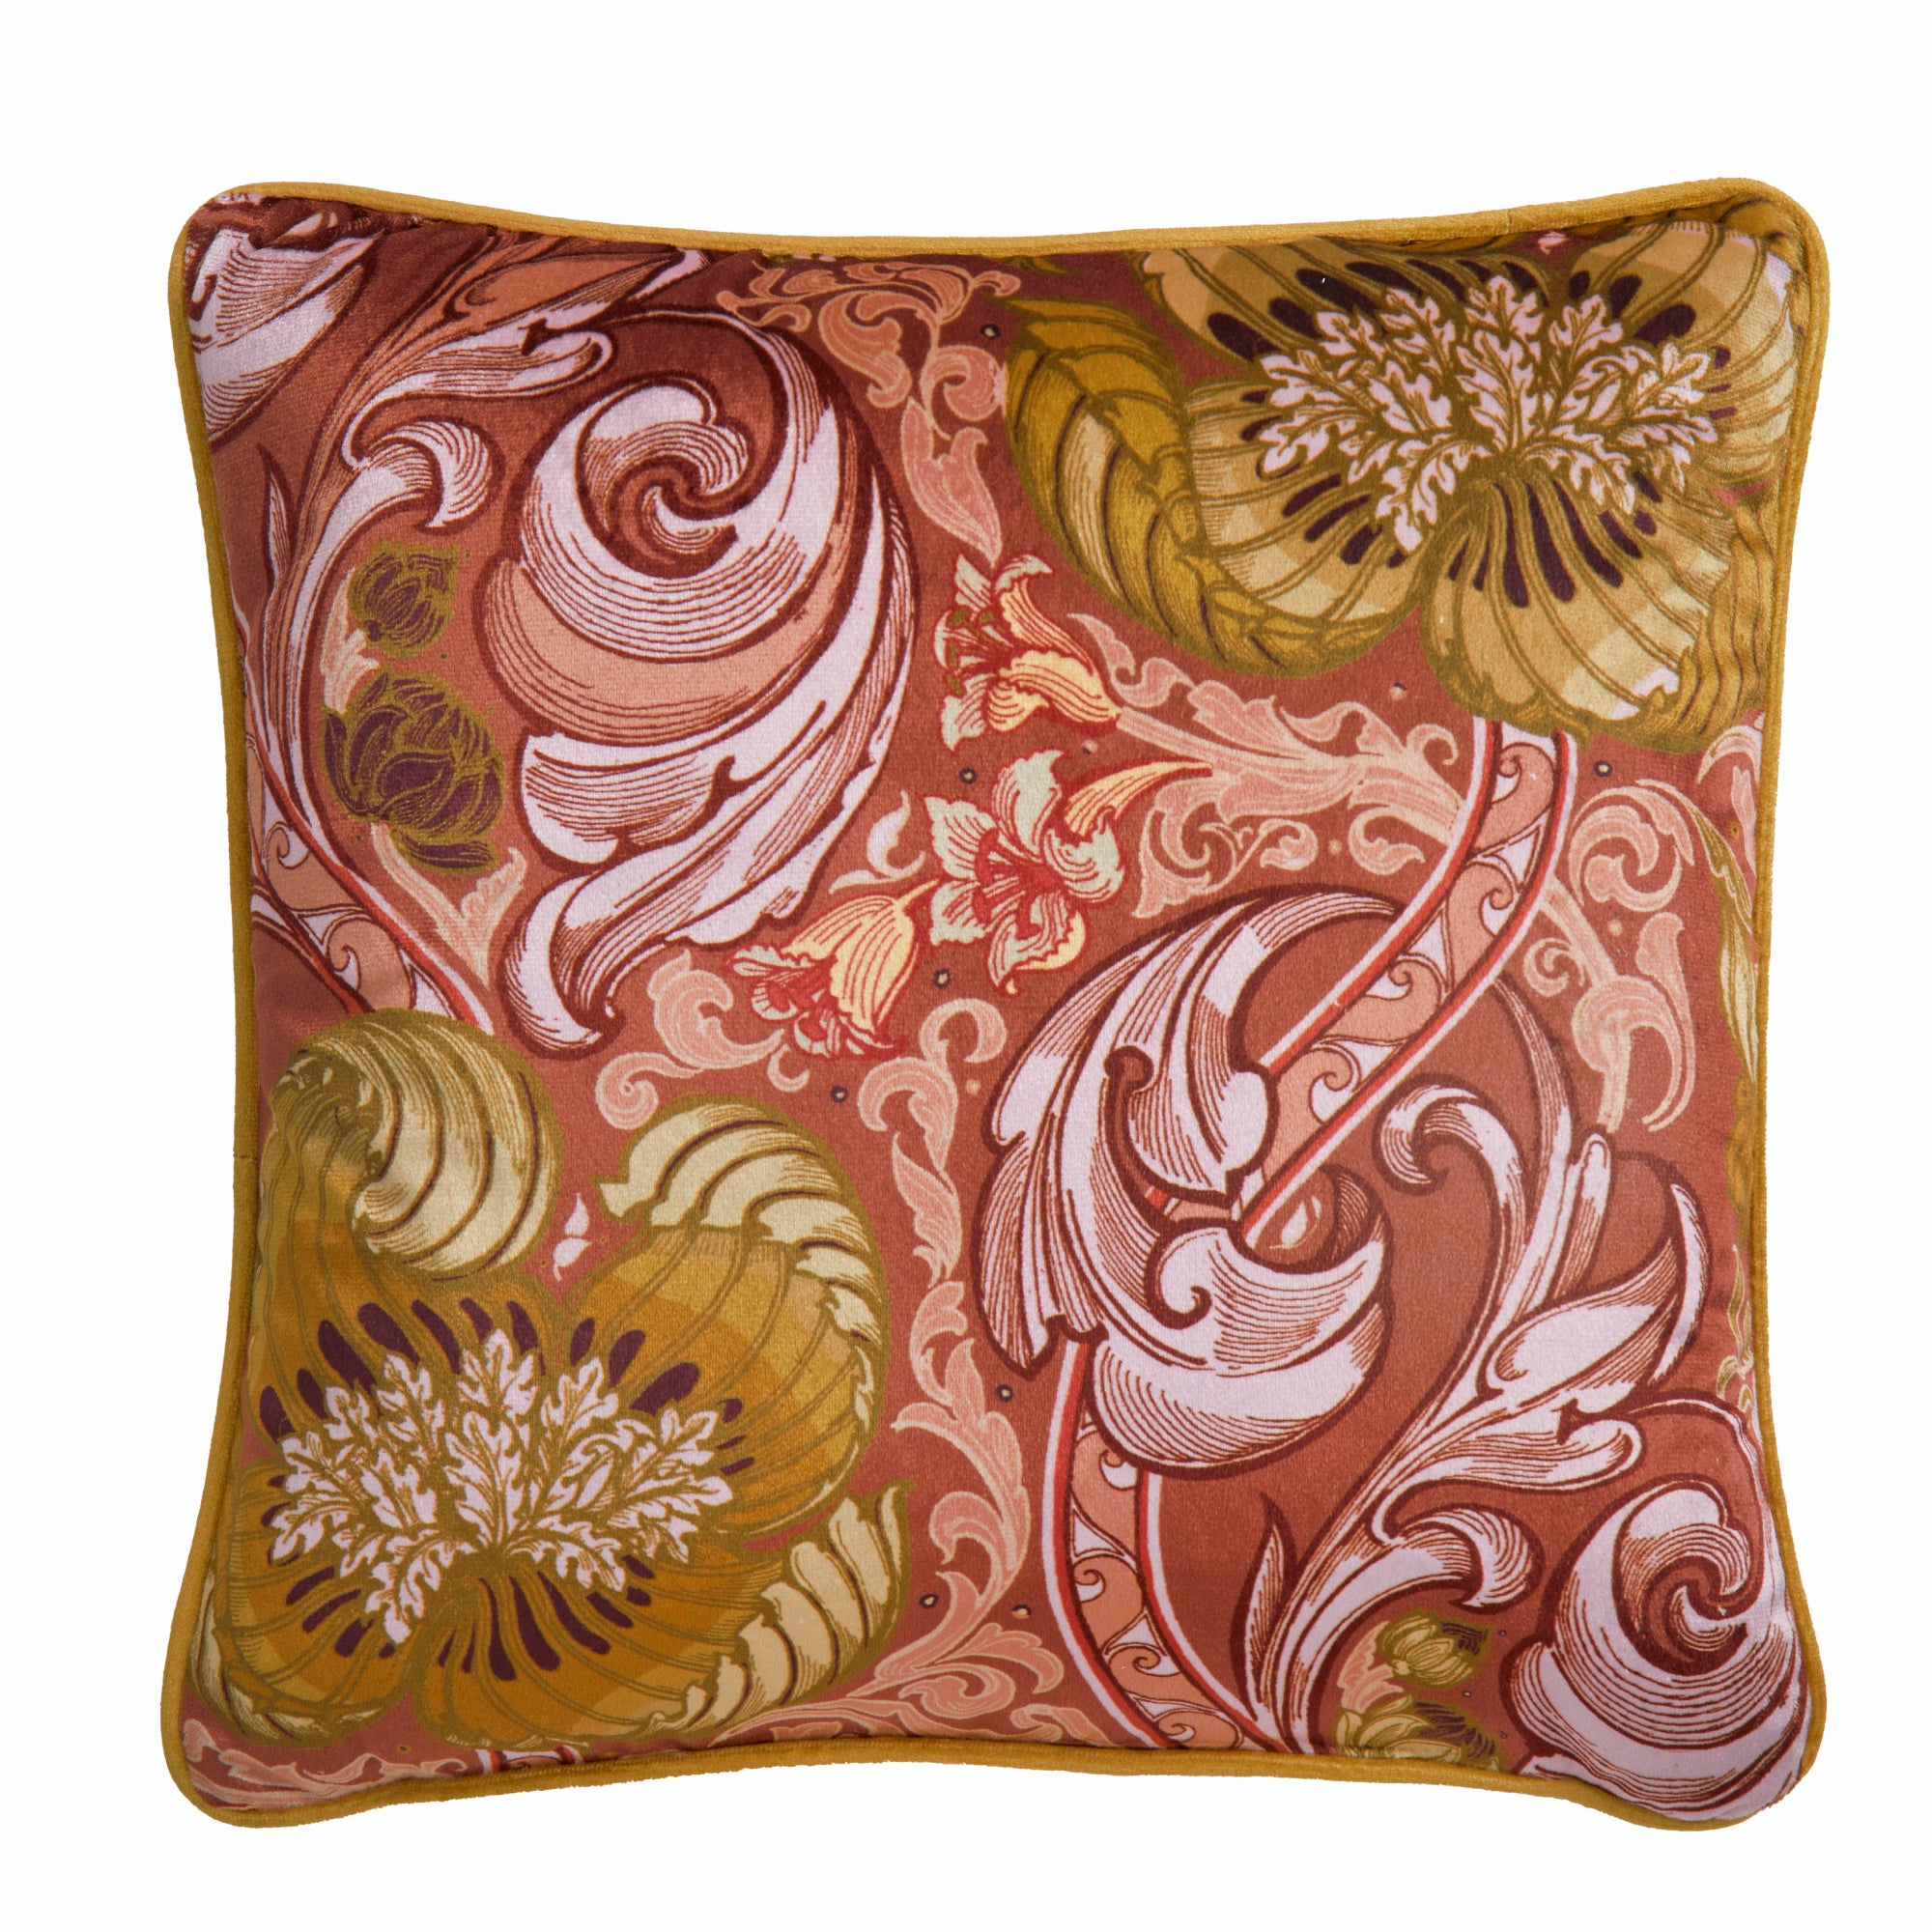 Filled Cushion Down the Dilly by Laurence Llewelyn-Bowen in Terracotta